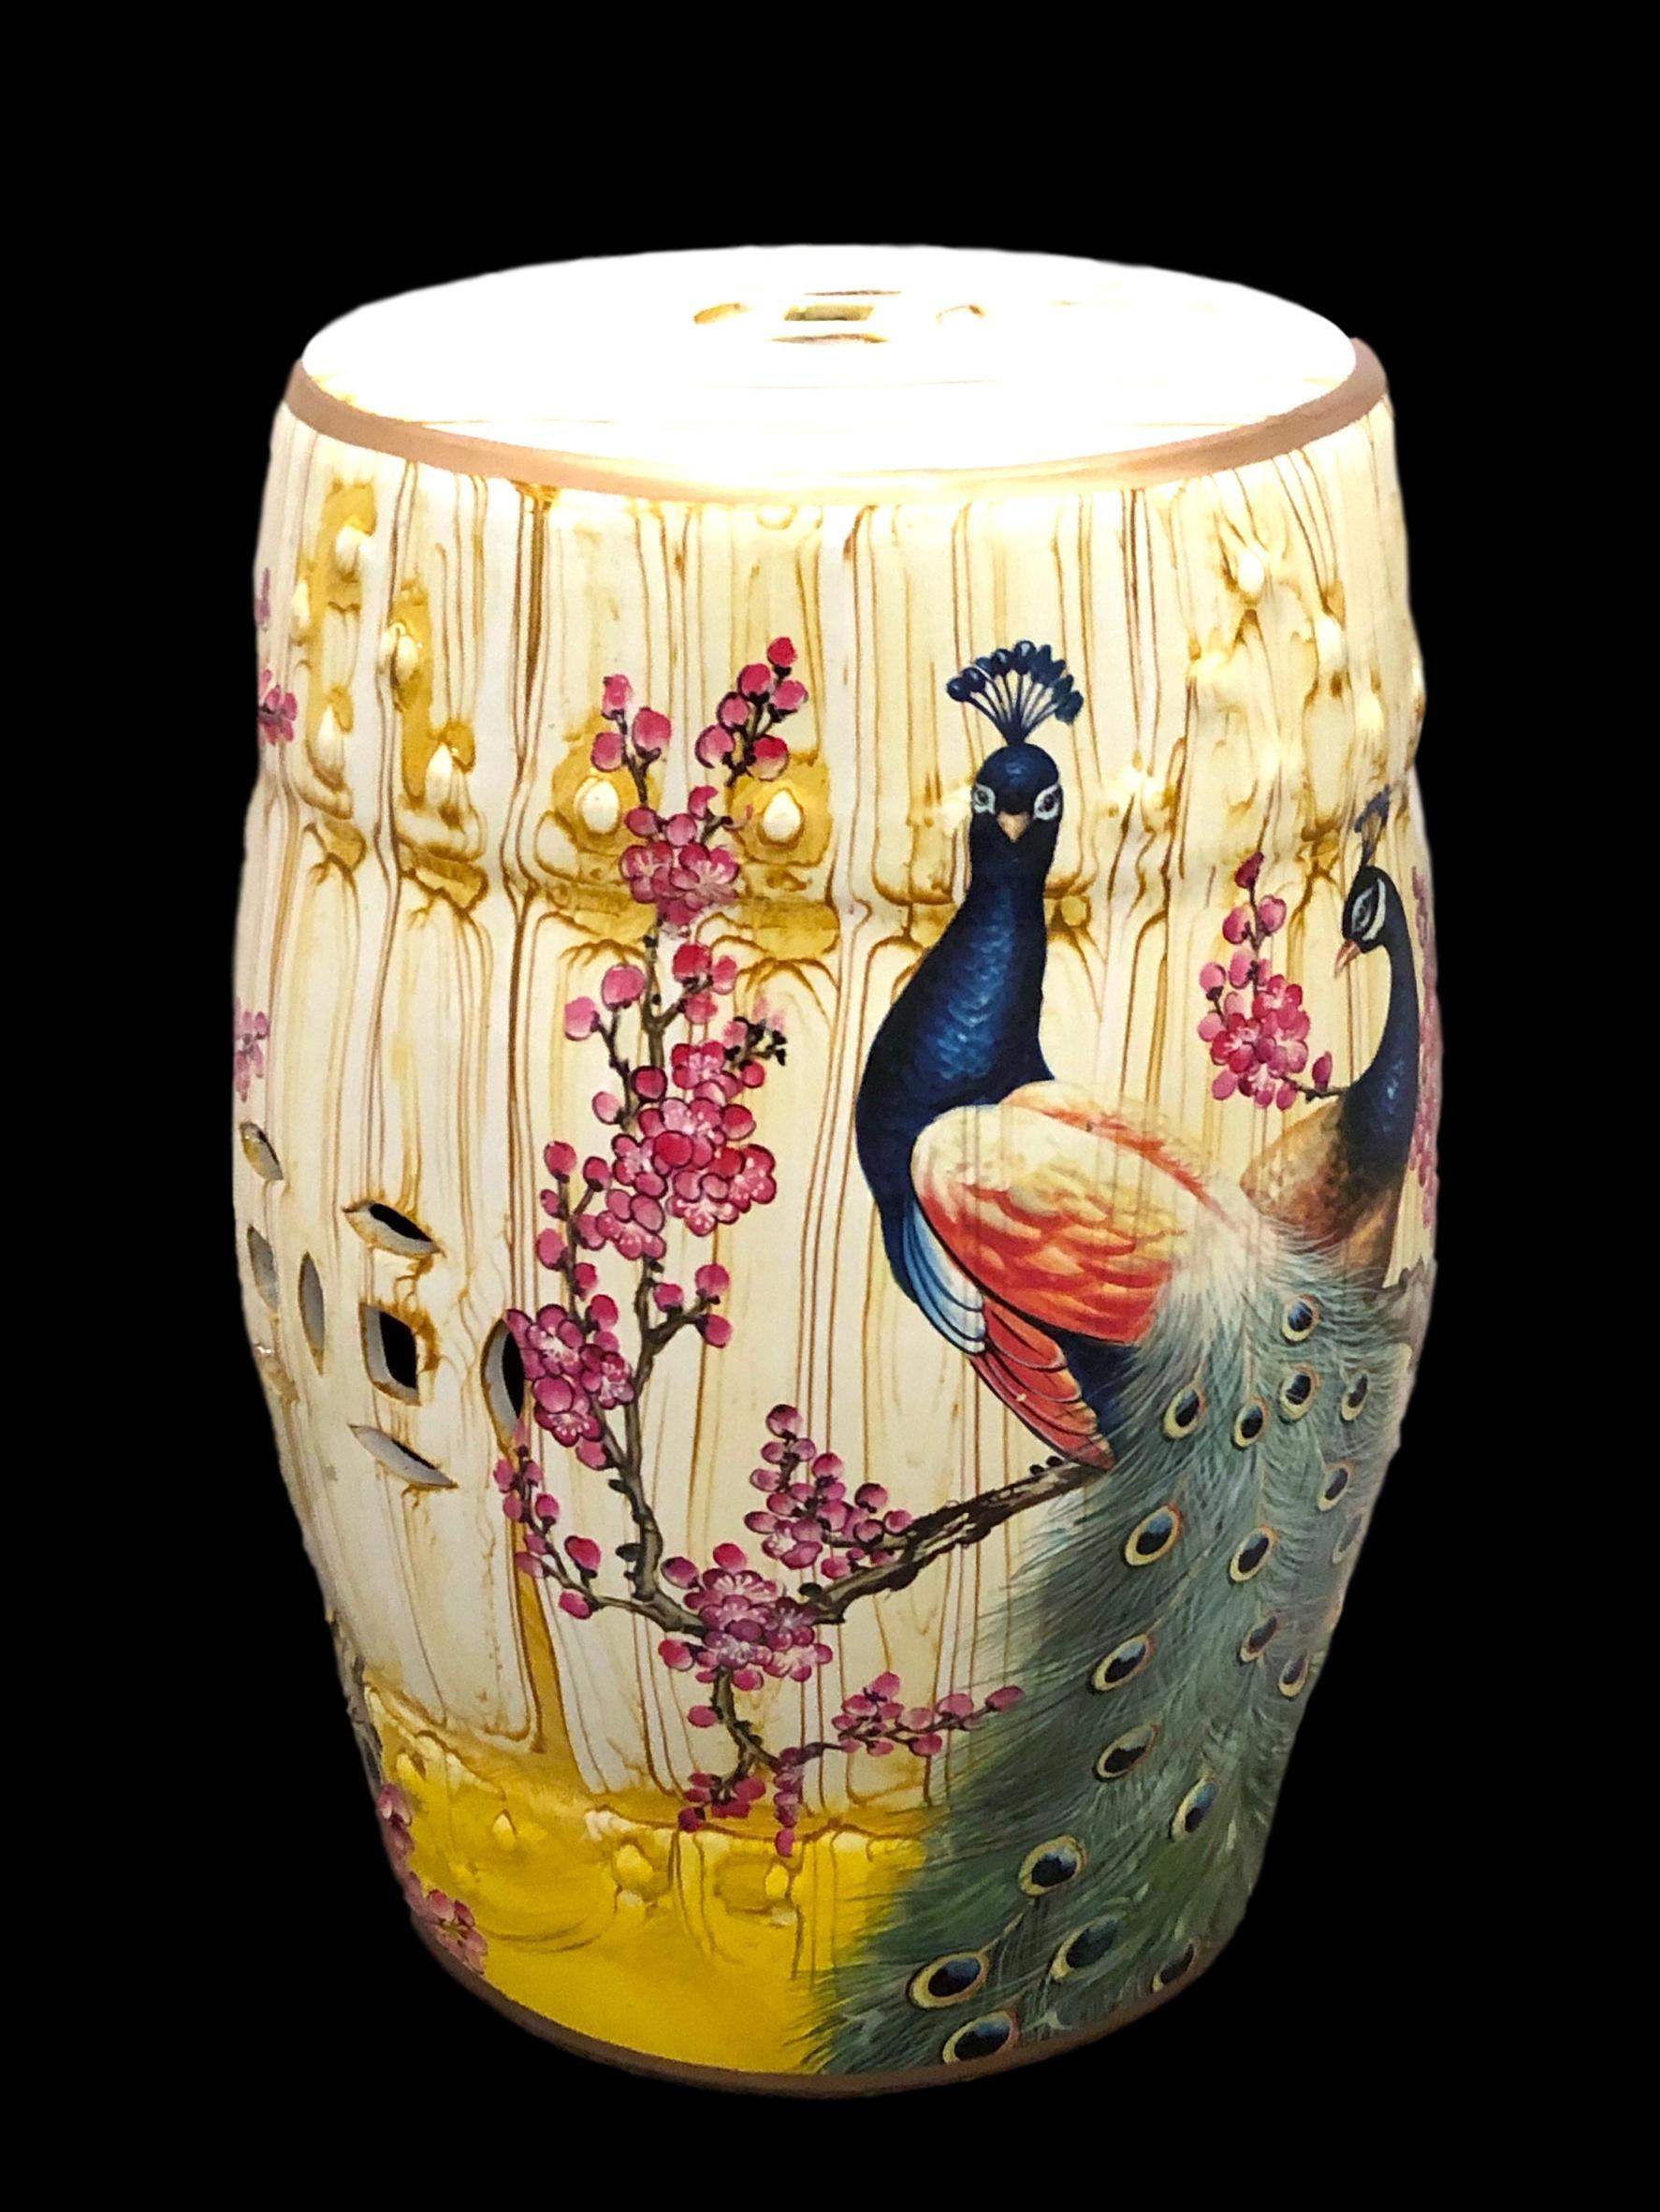 Mid-20th century Chinese export hand painted porcelain yellow and faux bamboo style garden stool or flower pot seat. This lovely piece has a flower and peacock motif on two sides. Features raised dot detail and Chinese geometric cut-out symbols on